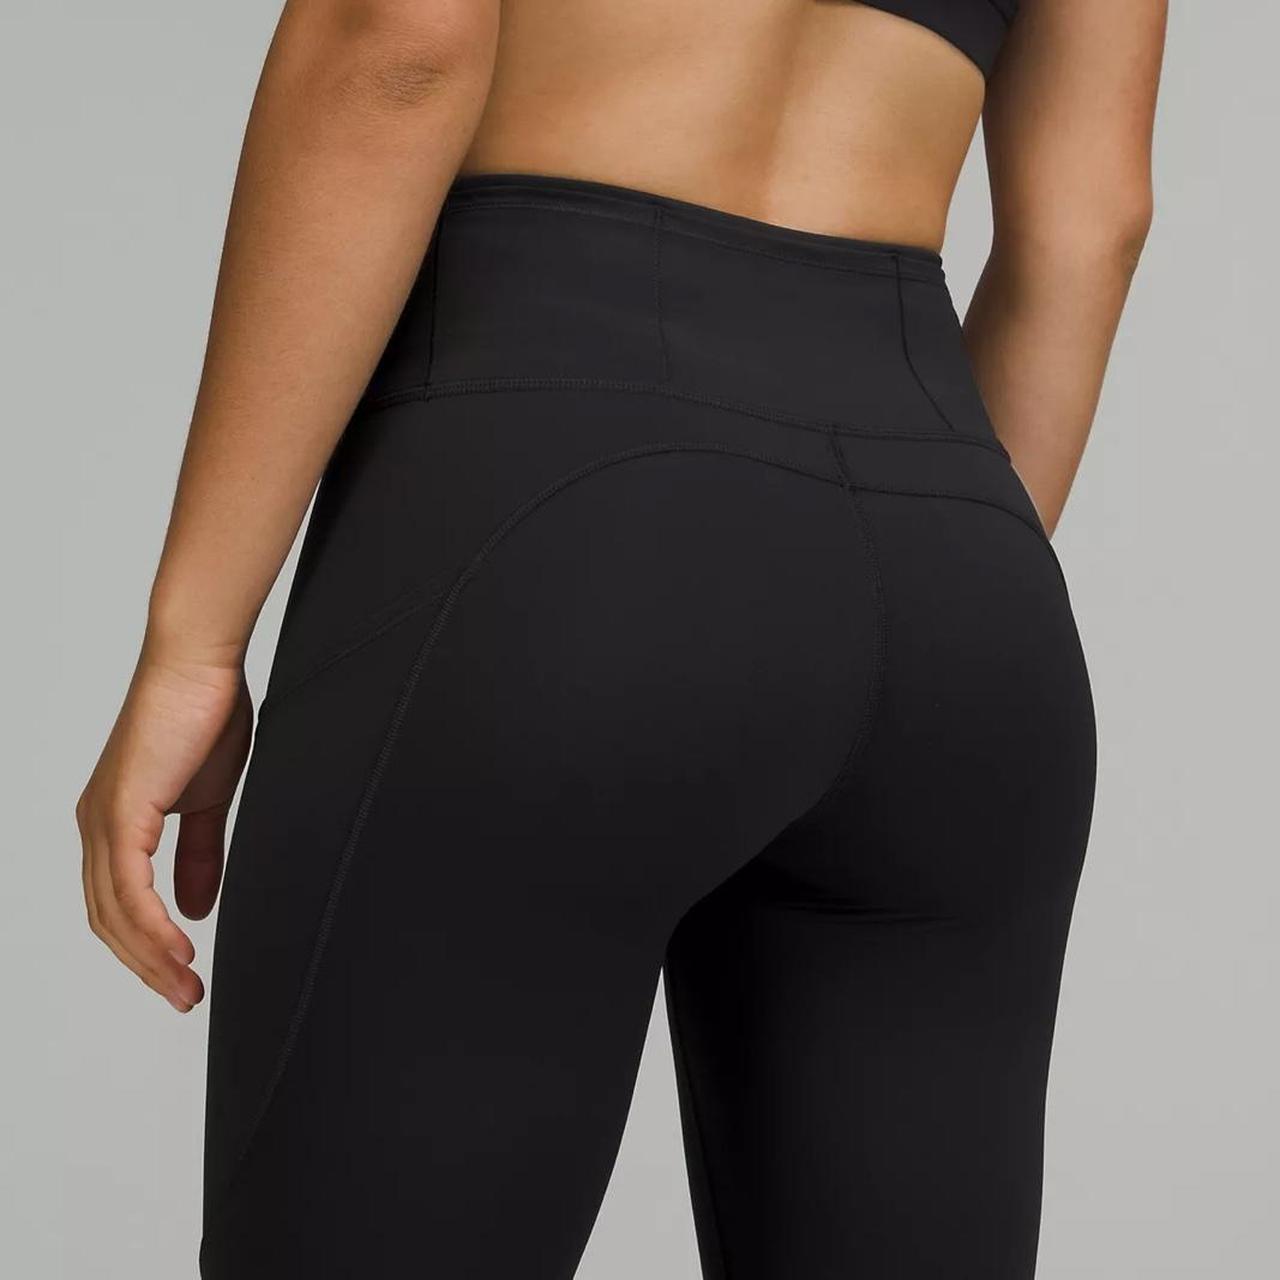 Lululemon Fast and Free High-Rise Tight 25 - Size 4